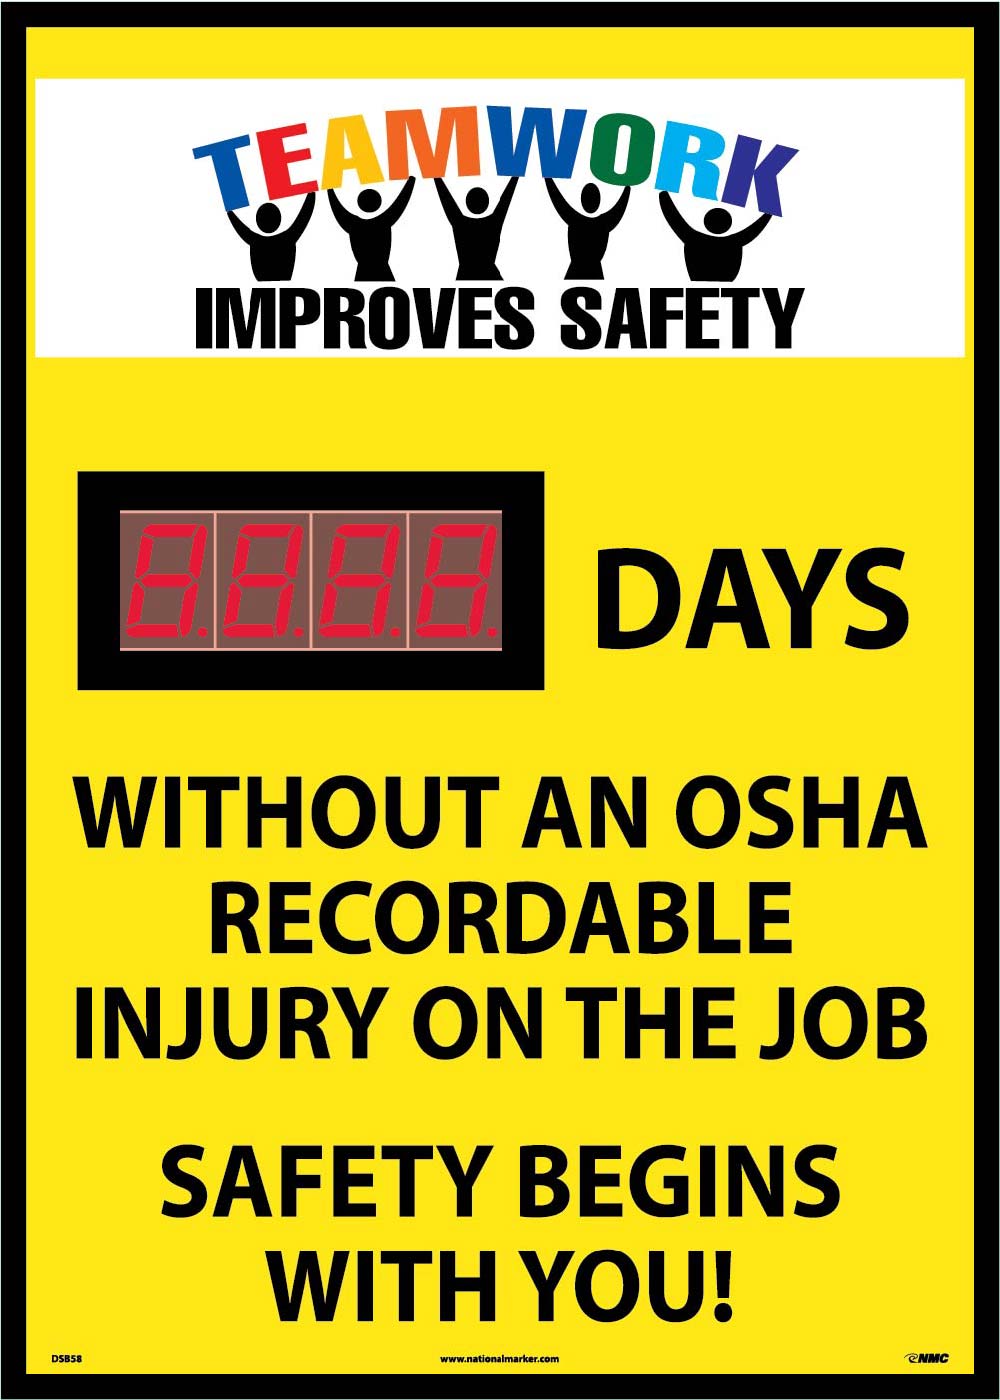 Teamwork Improves Safety Days Without An Osha Recordable Injury Scoreboard-eSafety Supplies, Inc